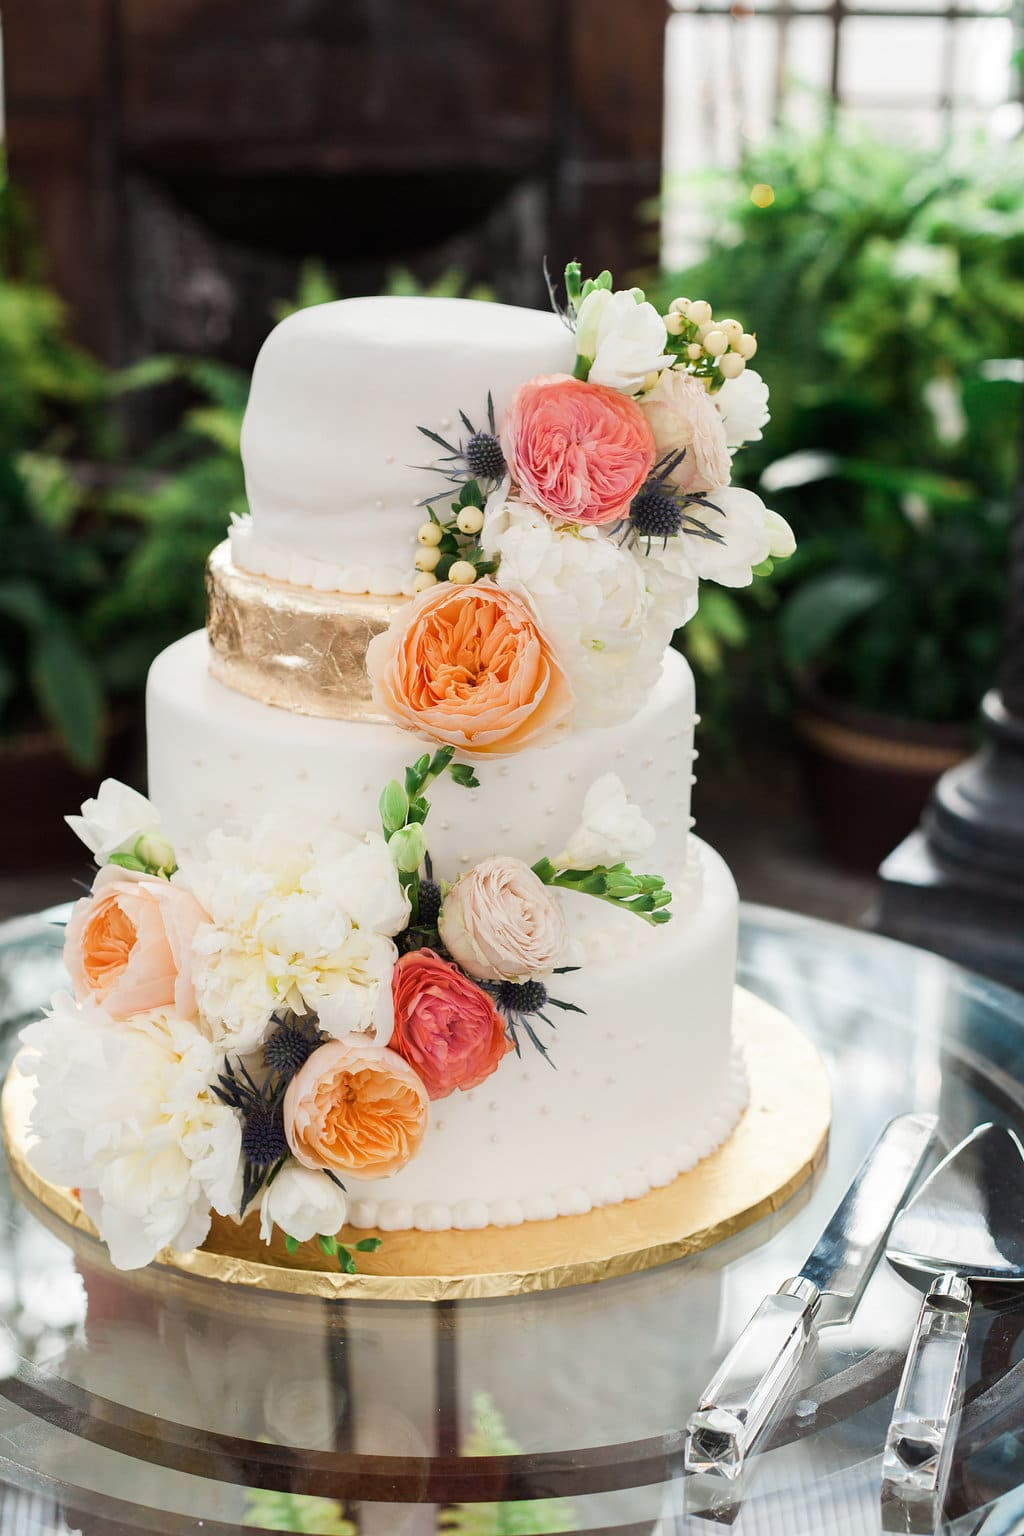 Wedding Cake Design
 Trendy Wedding Cake Styles Designs and Toppers